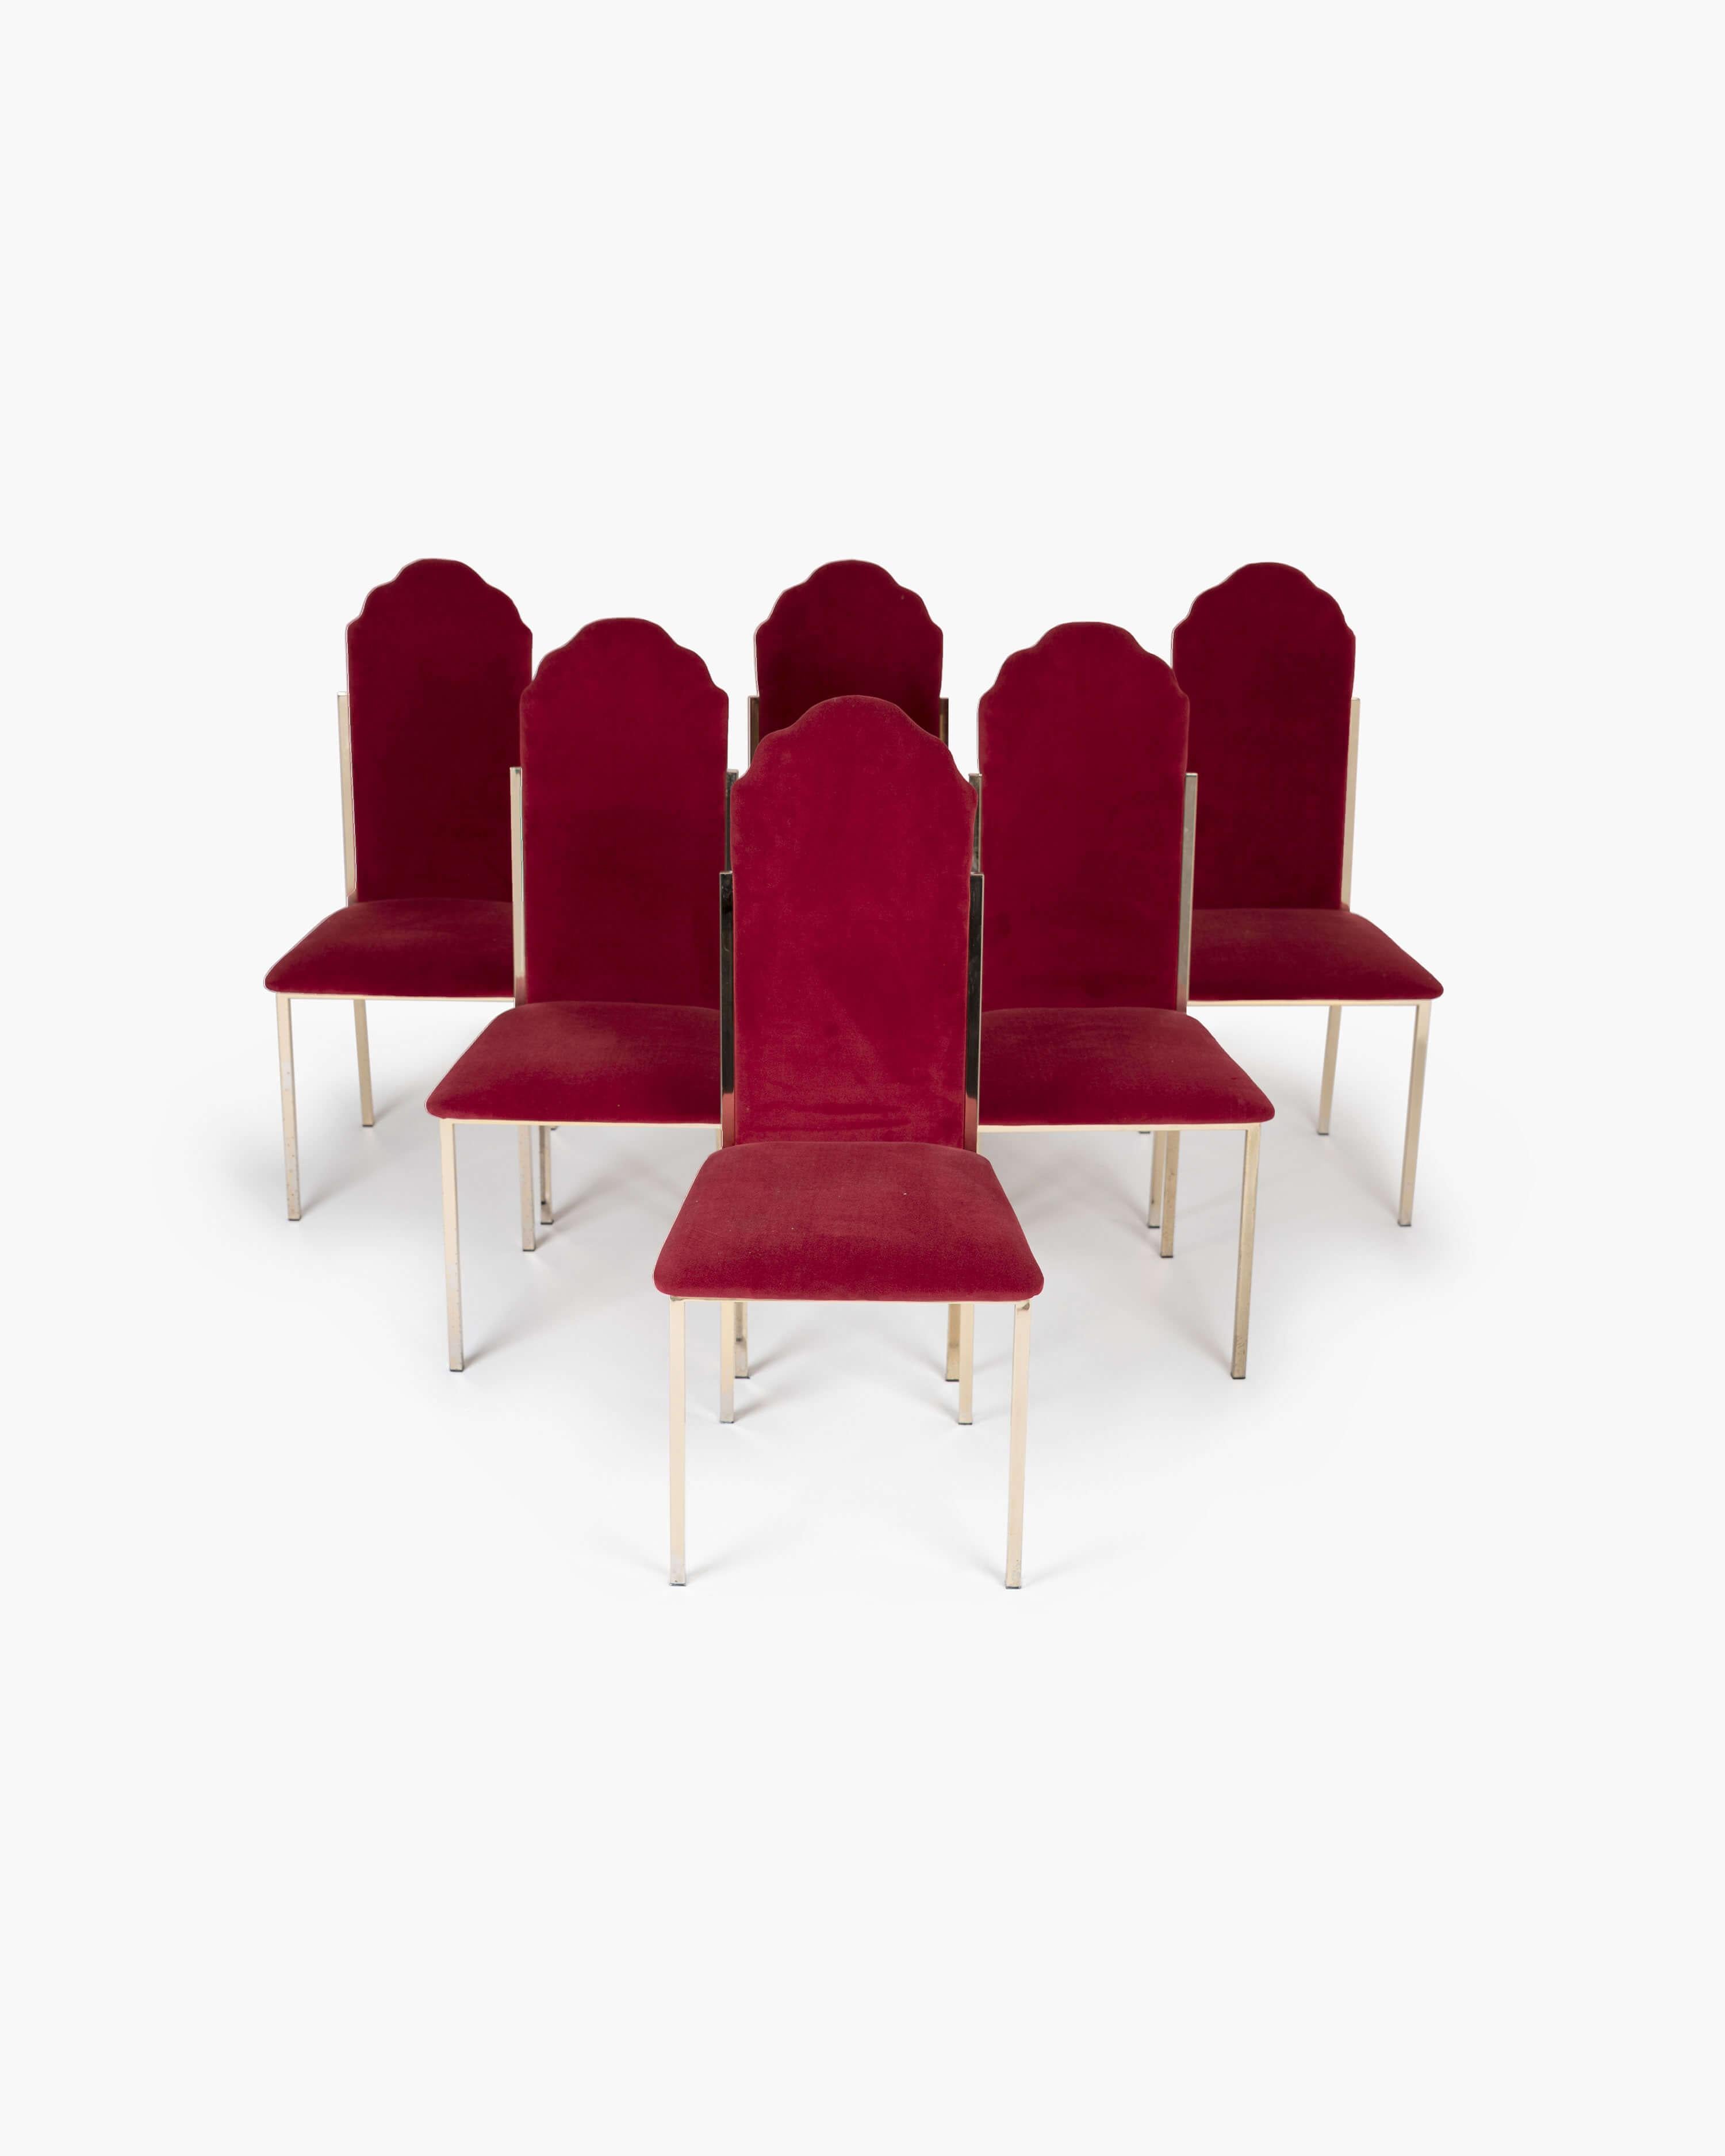 Designed by French cinema icon Alain Delon for the Paris-based interior decoration house Maison Jansen, this set of six Hollywood Regency dining chairs feature a scalloped high-back and slender brass frame with red velvet upholstery.